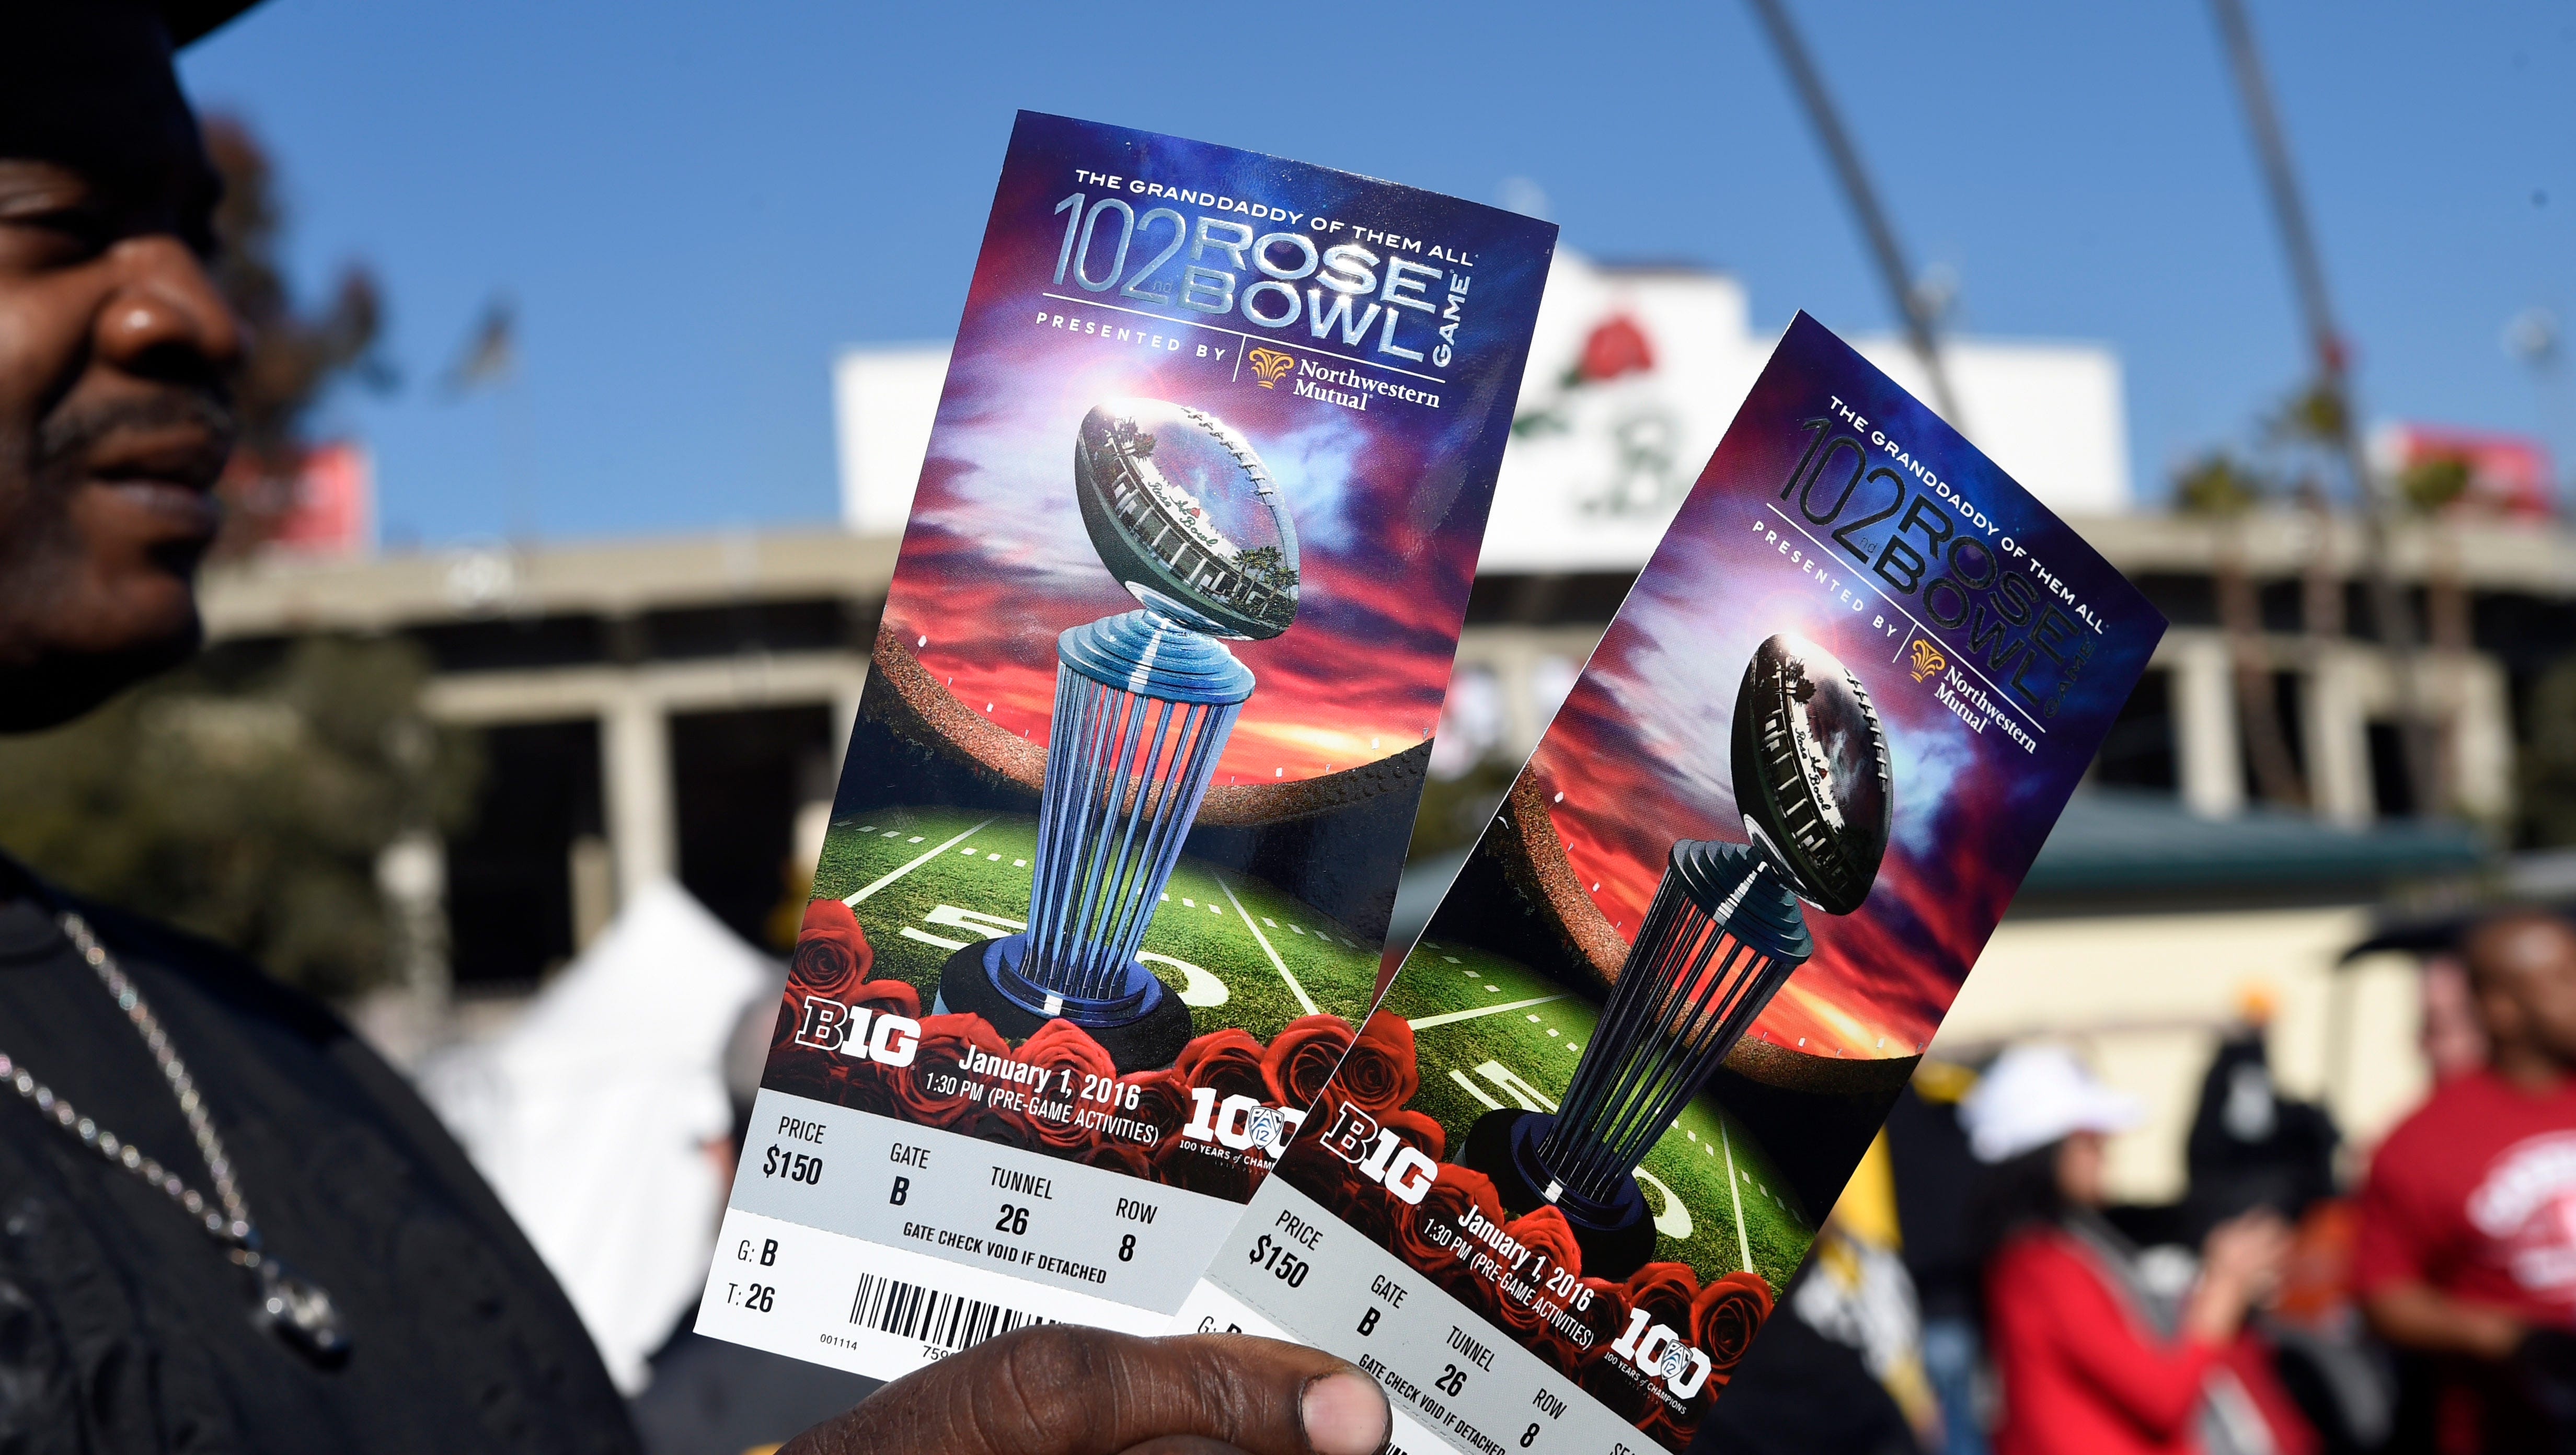 Detail view of tickets before the game between the Iowa Hawkeyes and the Stanford Cardinal in the 2016 Rose Bowl at Rose Bowl.